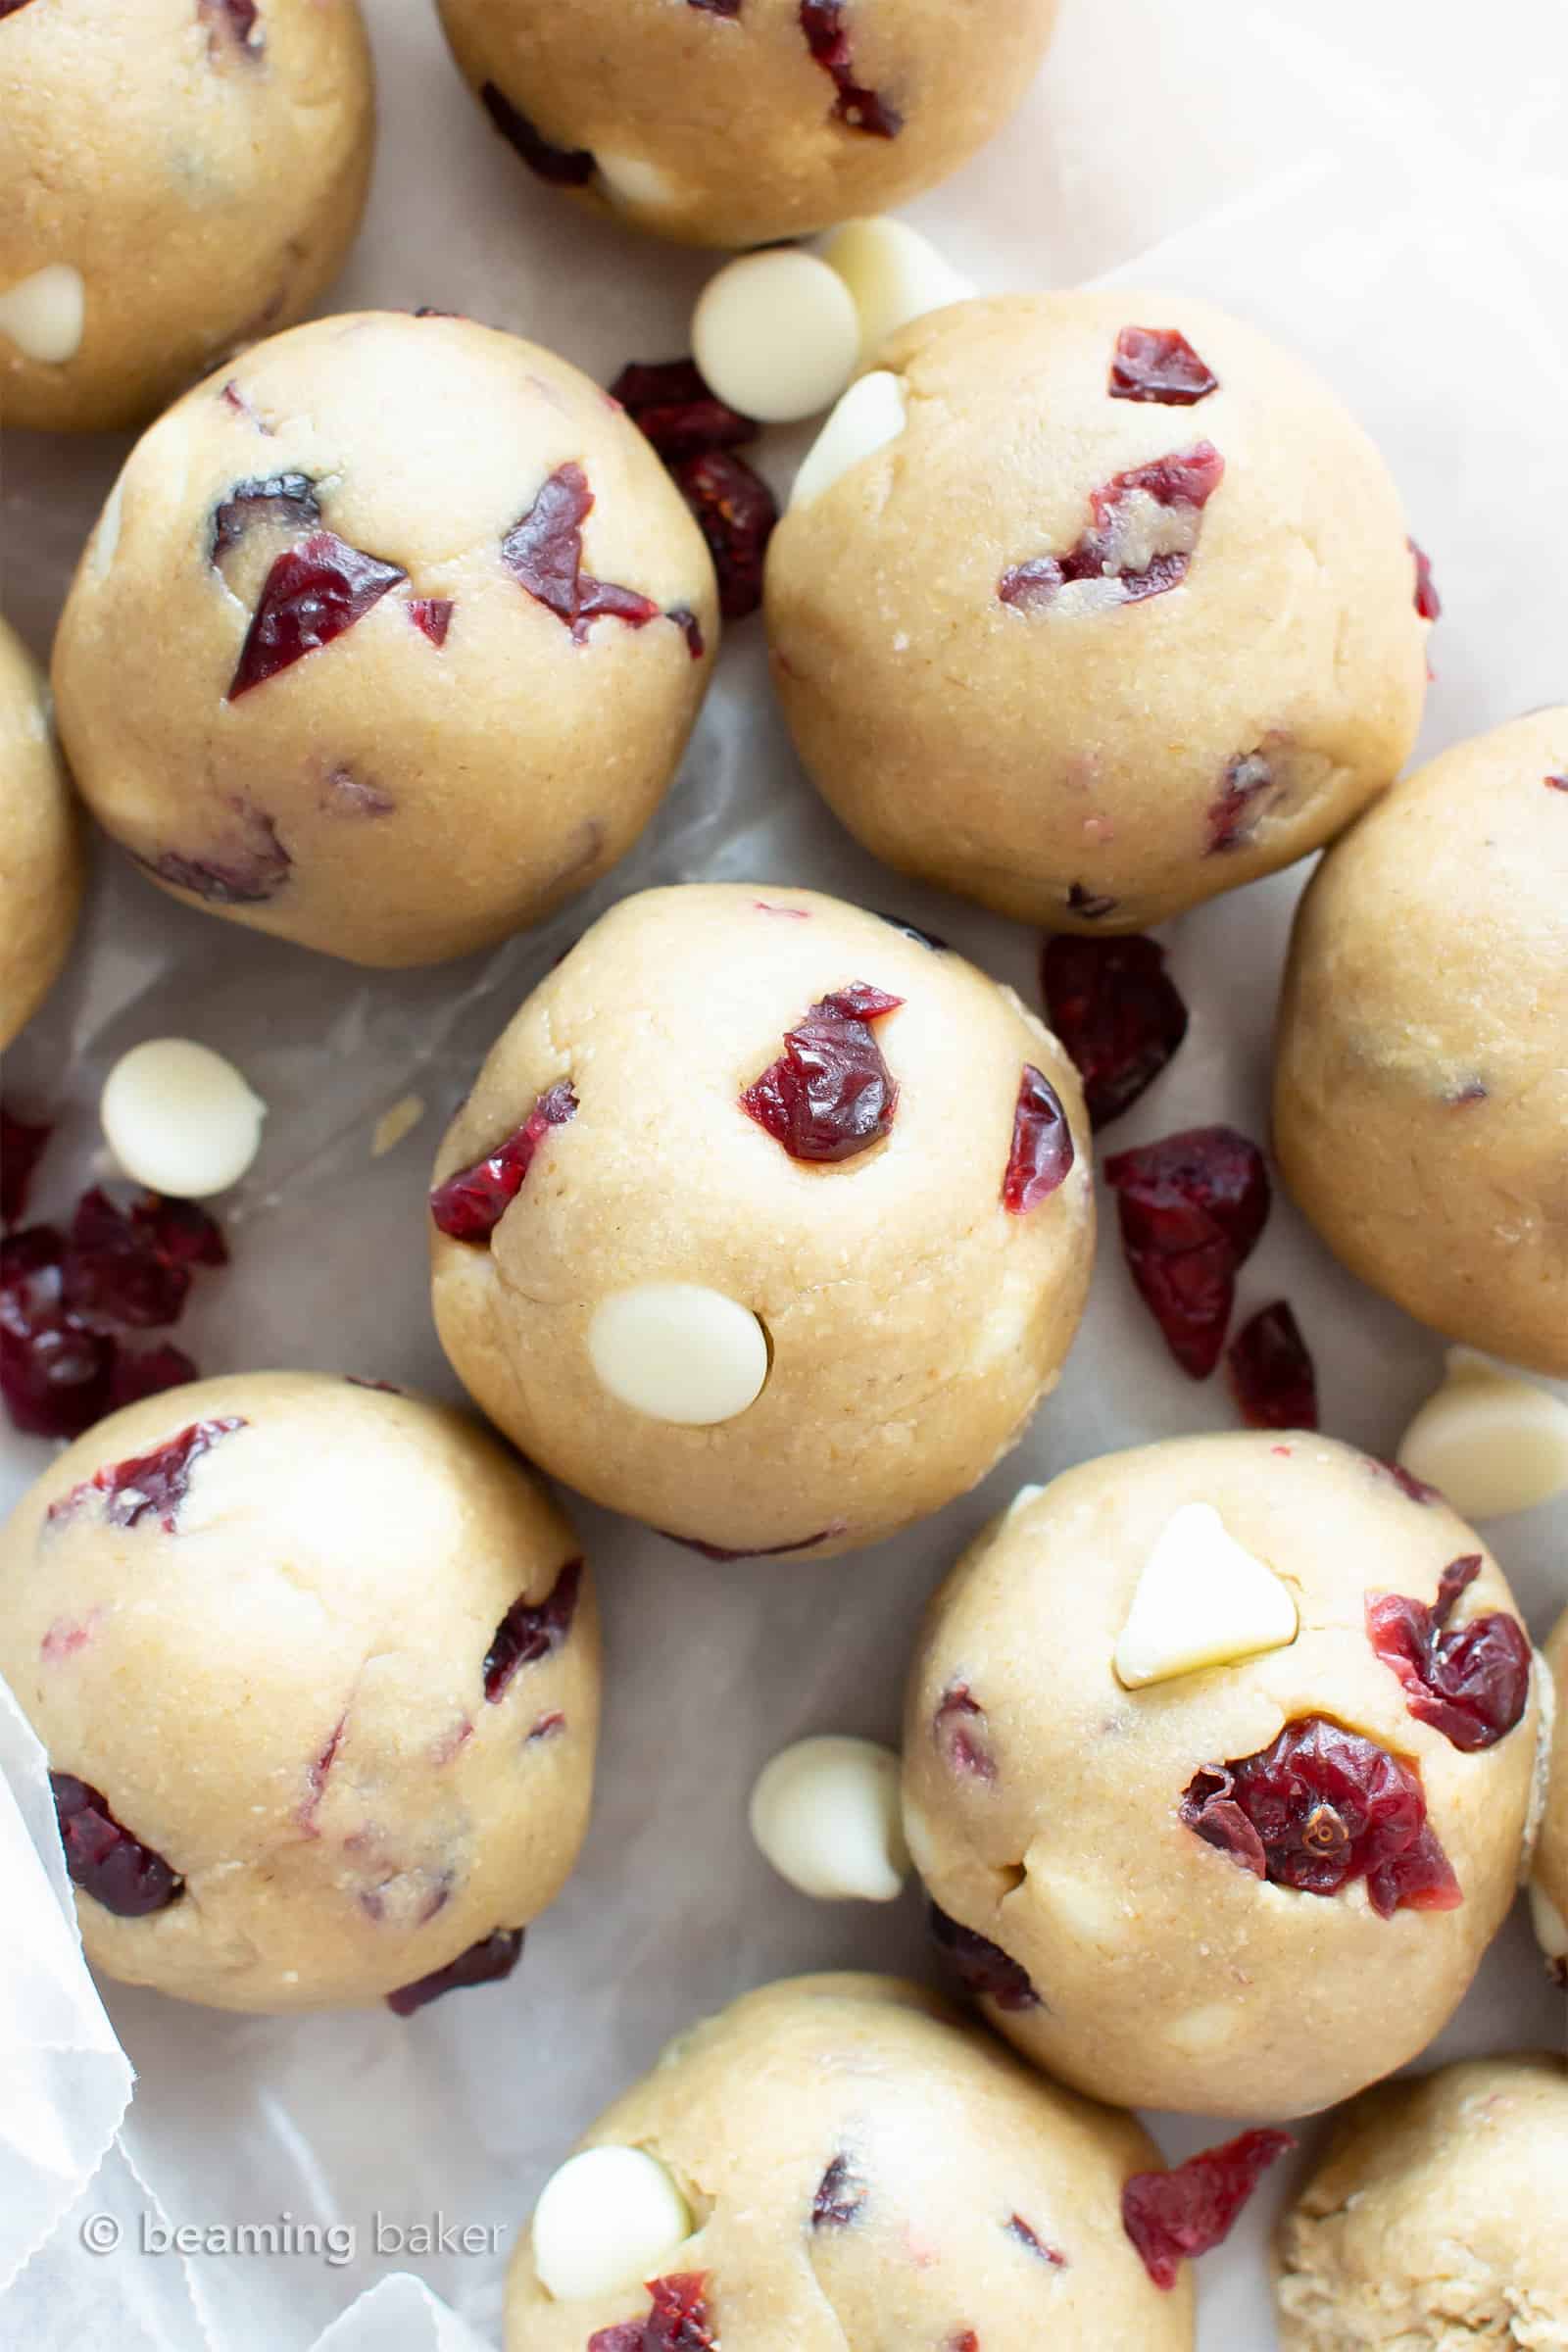 White Chocolate Cranberry Cookie Dough Bites (GF): this easy, no bake recipe for Vegan + Gluten Free cookie dough balls is deliciously sweet & tart! White chocolate chips & dried cranberries complement soft vegan cookie dough. Dairy-Free. #CookieDough #NoBake #Vegan #GlutenFree #Cranberries | Recipe at BeamingBaker.com